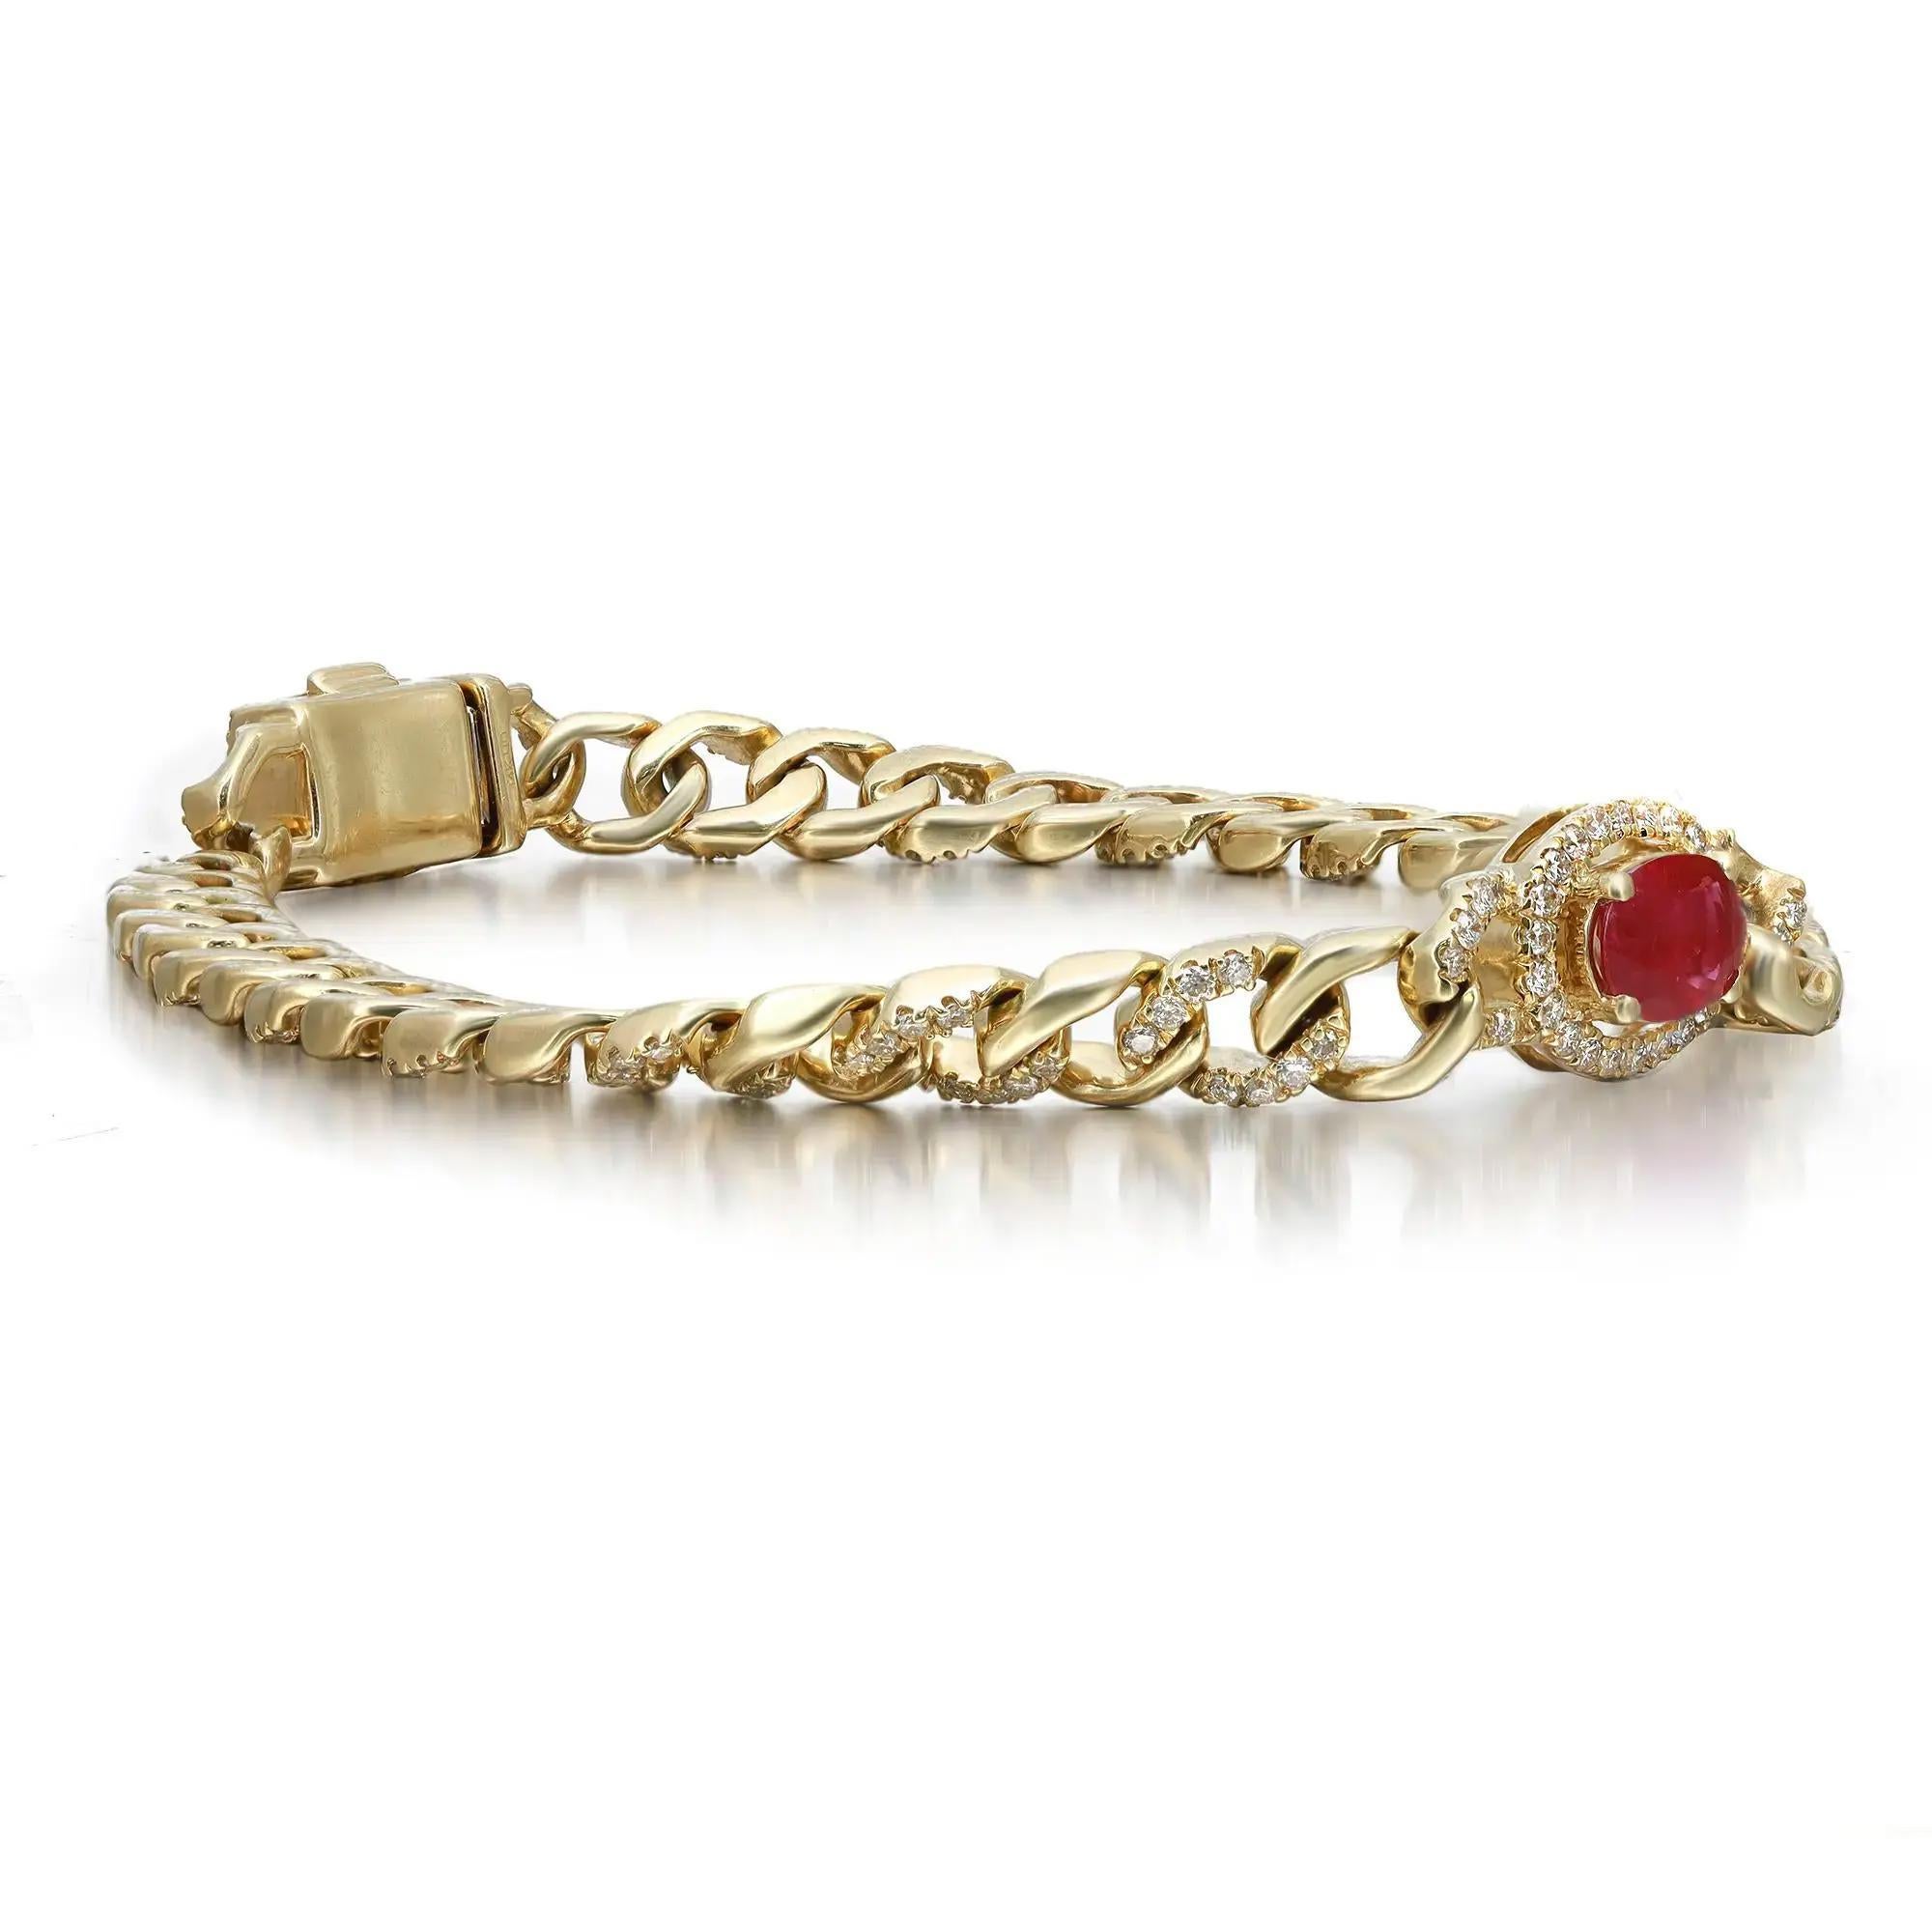 This beautifully crafted chain bracelet features a prong set oval shaped Ruby in the center with a round cut diamond halo attached to a pave set round diamond studded Cuban link chain. Crafted in 14k yellow gold. Total ruby weight: 0.94 carat. Total